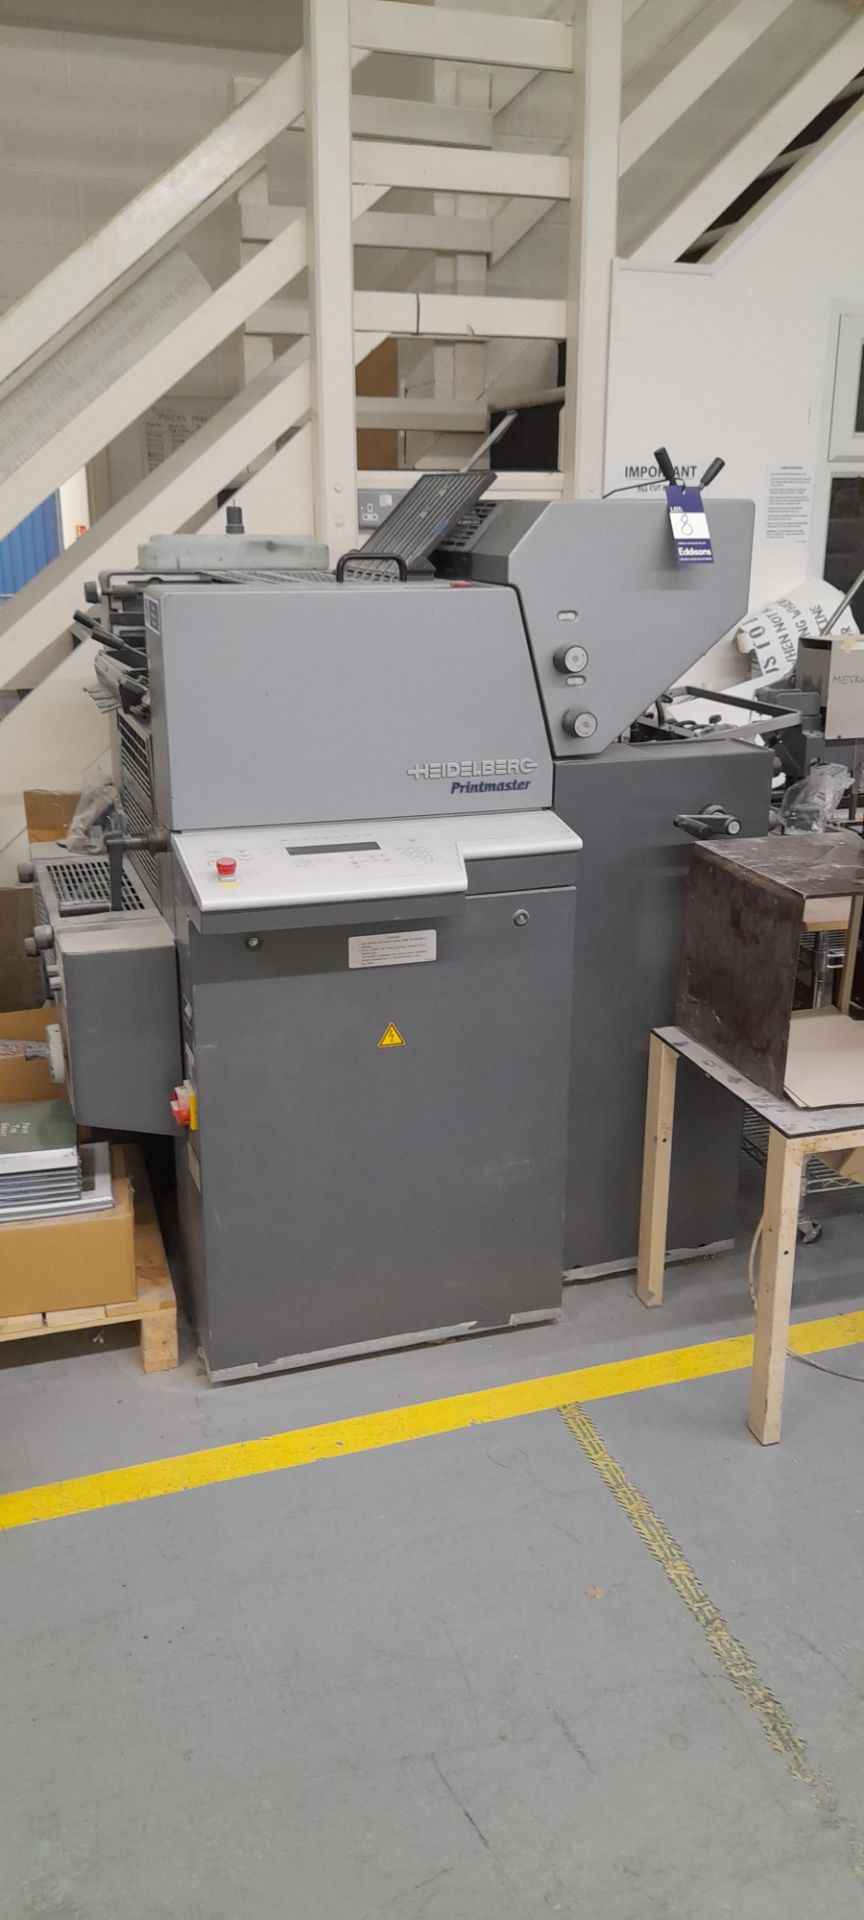 Heidelberg Printmaster A2 Printing Press, Serial number 963833. To be disconnected by a qualified